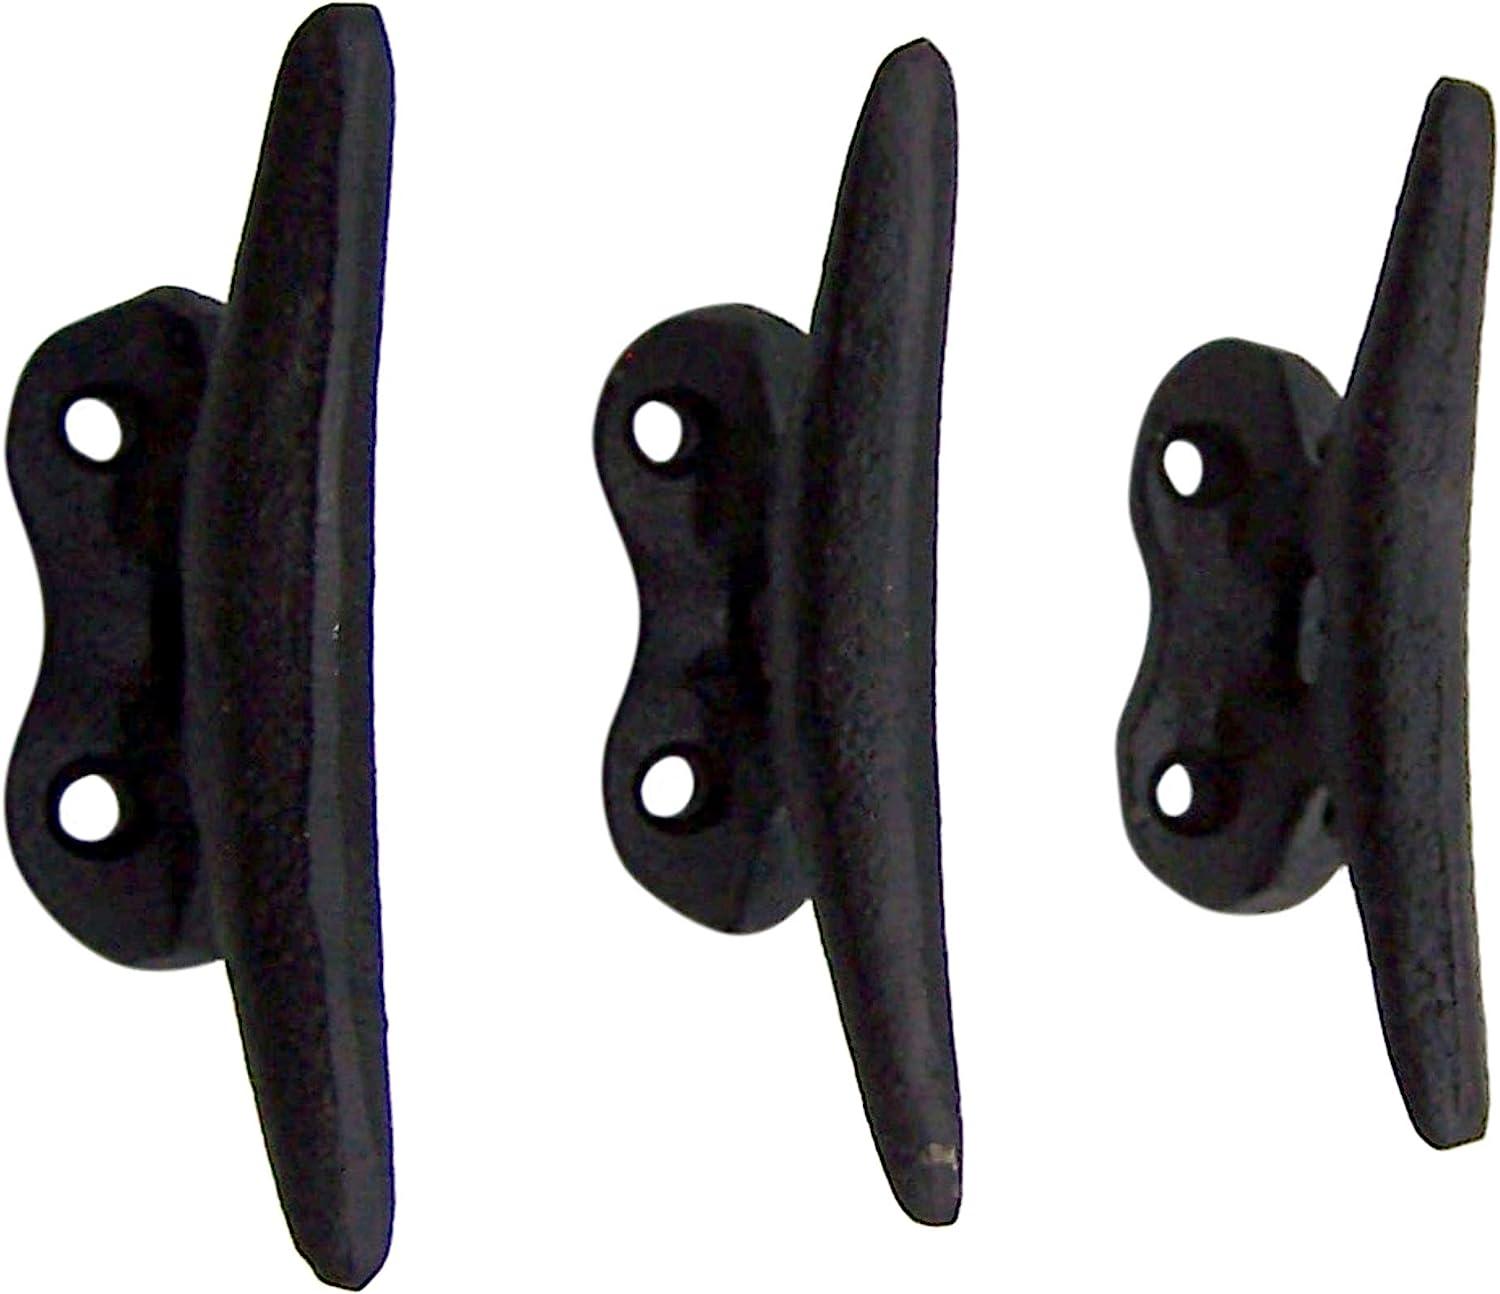 Nautical Black Cast Iron Boat Cleat Wall Hooks, 3.5 Inches, Set of 3